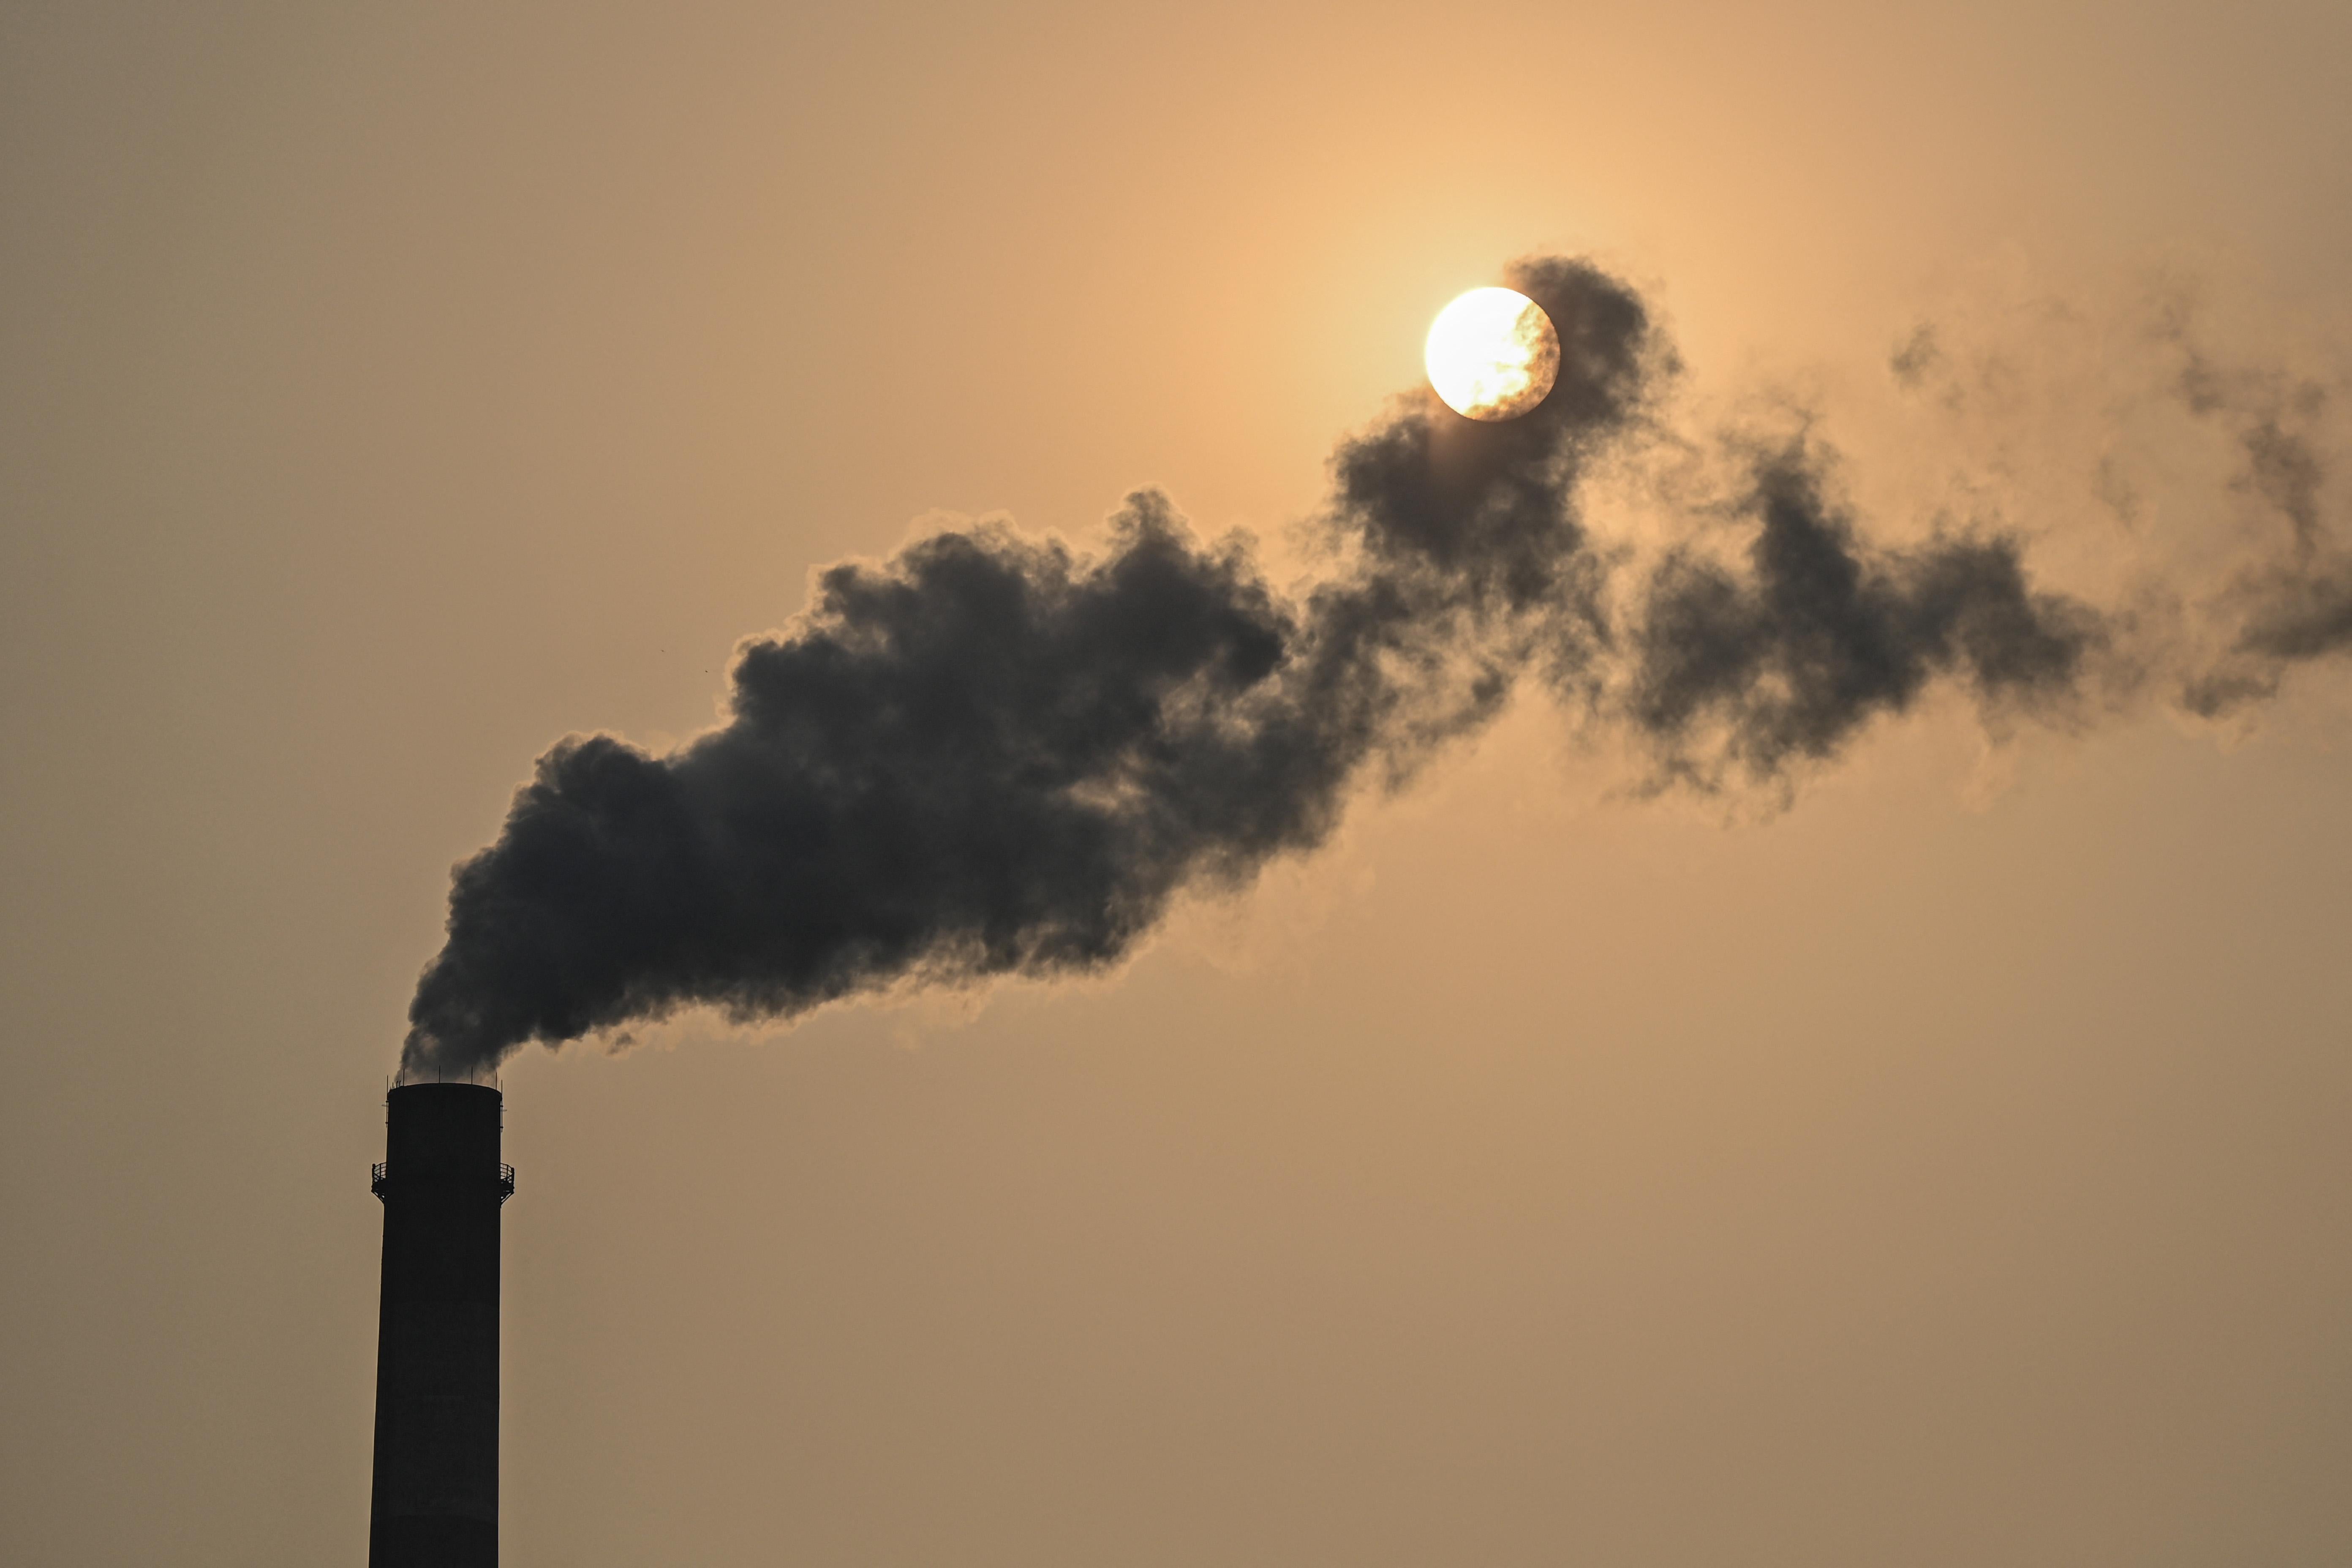 To the left of the image, a smokestack  releases a tower of smoke into a greyish, polluted sky. The sun can be seen behind the pollution. 